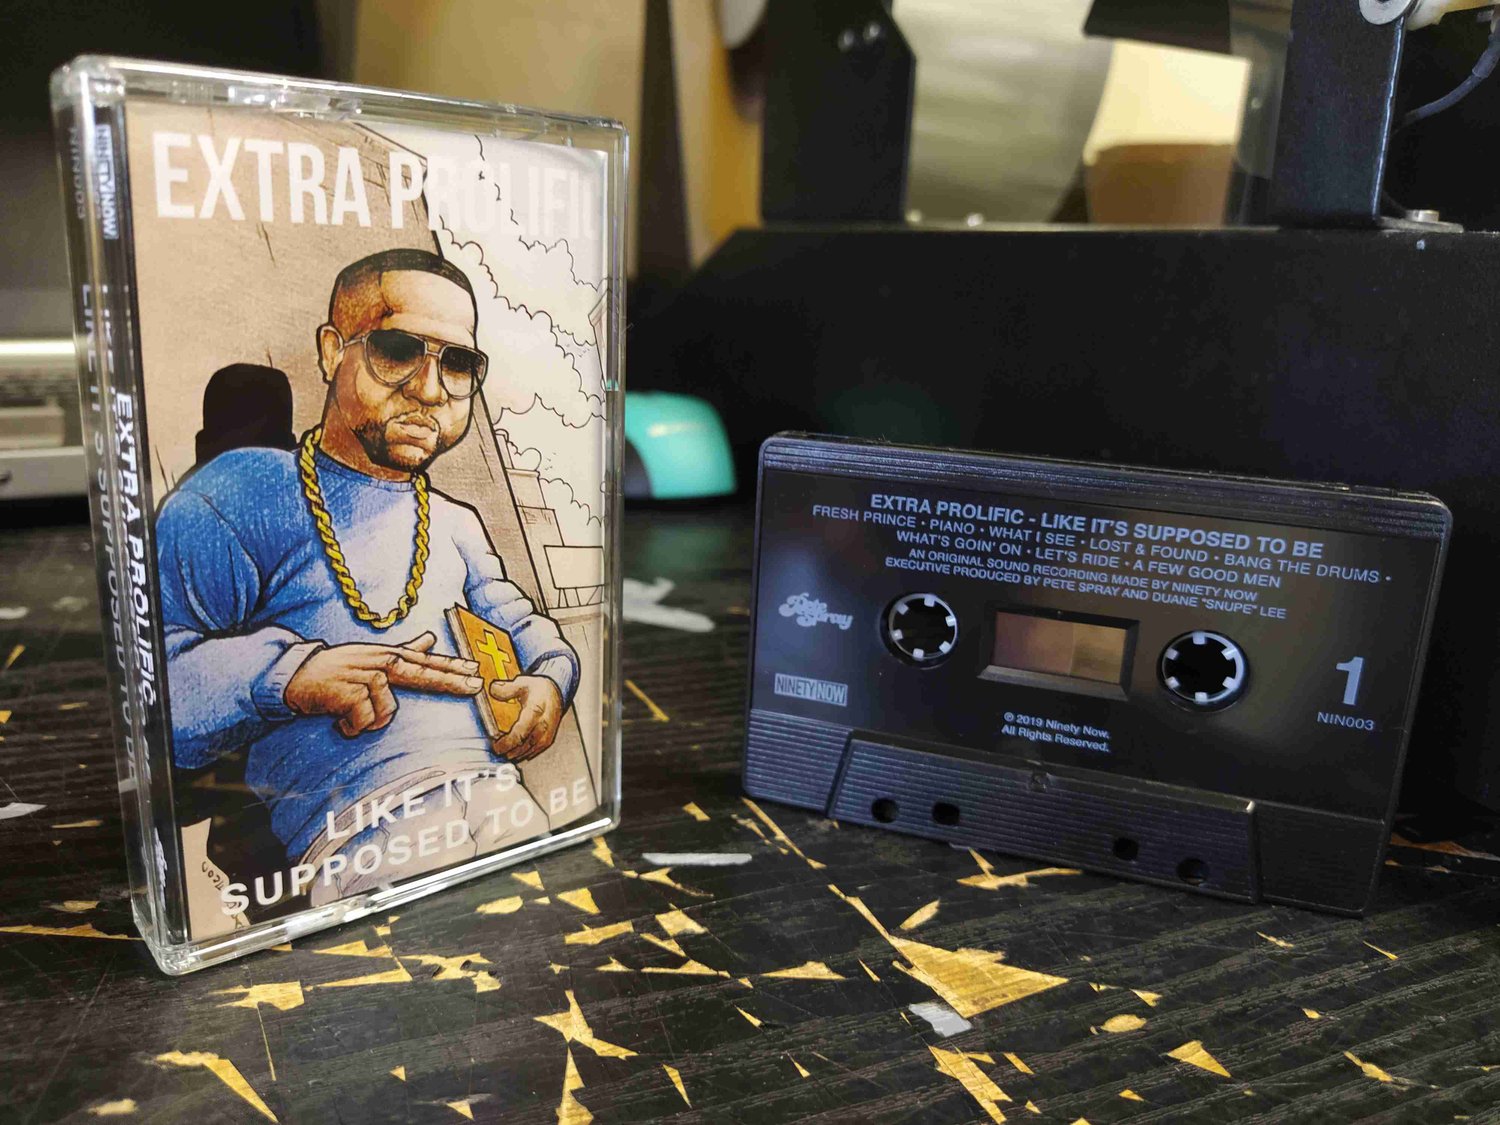 Image of Extra Prolific "Like It's Supposed To Be" Cassette